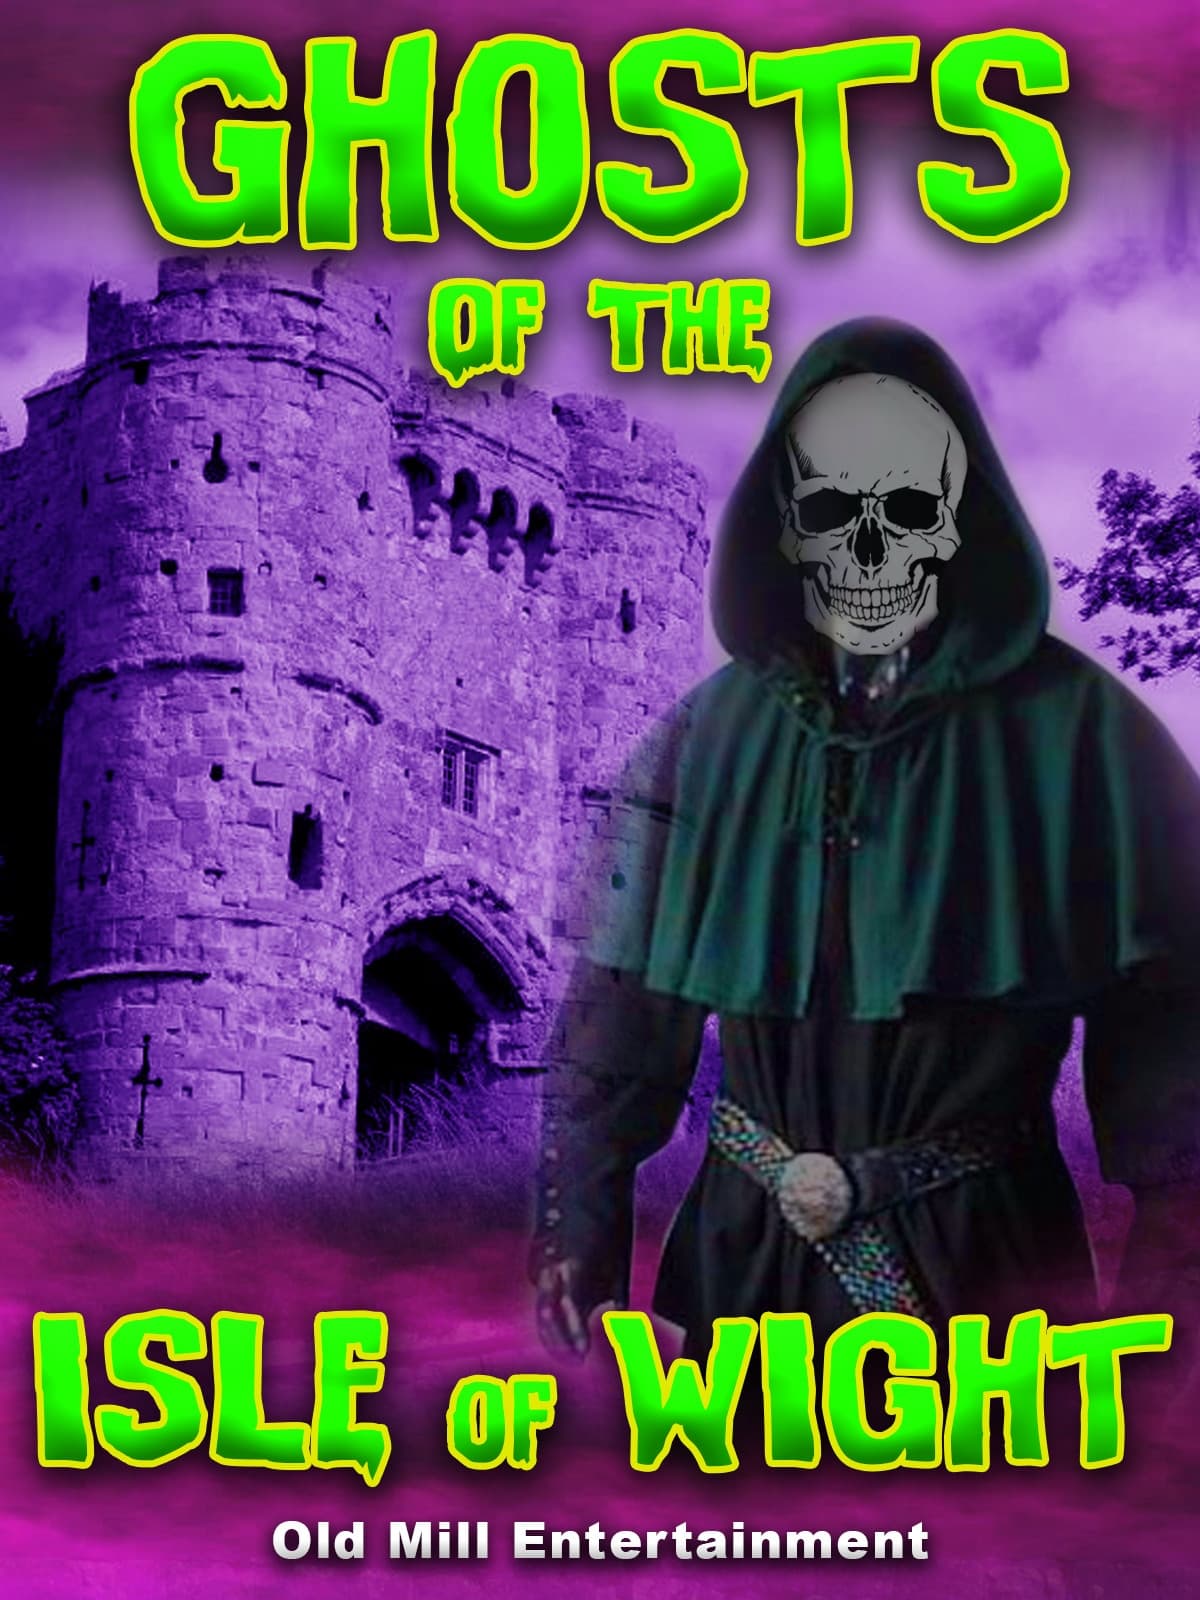 Ghosts of the Isle of Wight